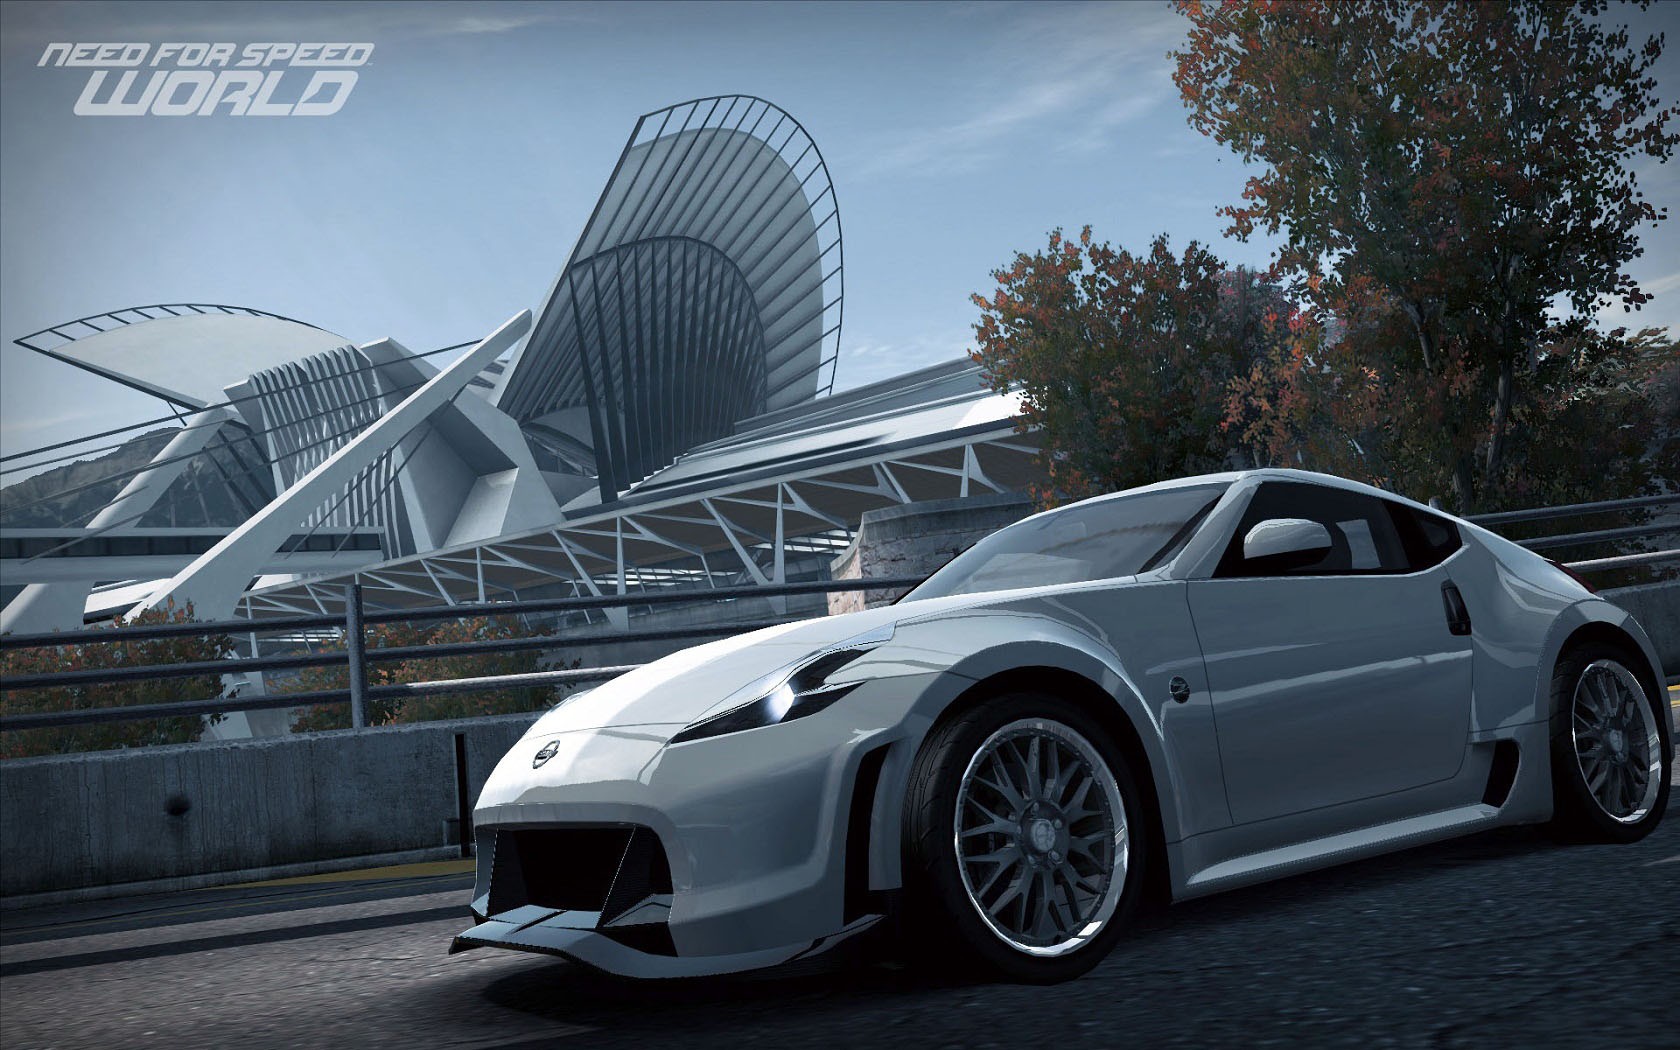 video, Games, Cars, Need, For, Speed, Nissan, 370z, Need, For, Speed, World, Games, Pc, Games Wallpaper